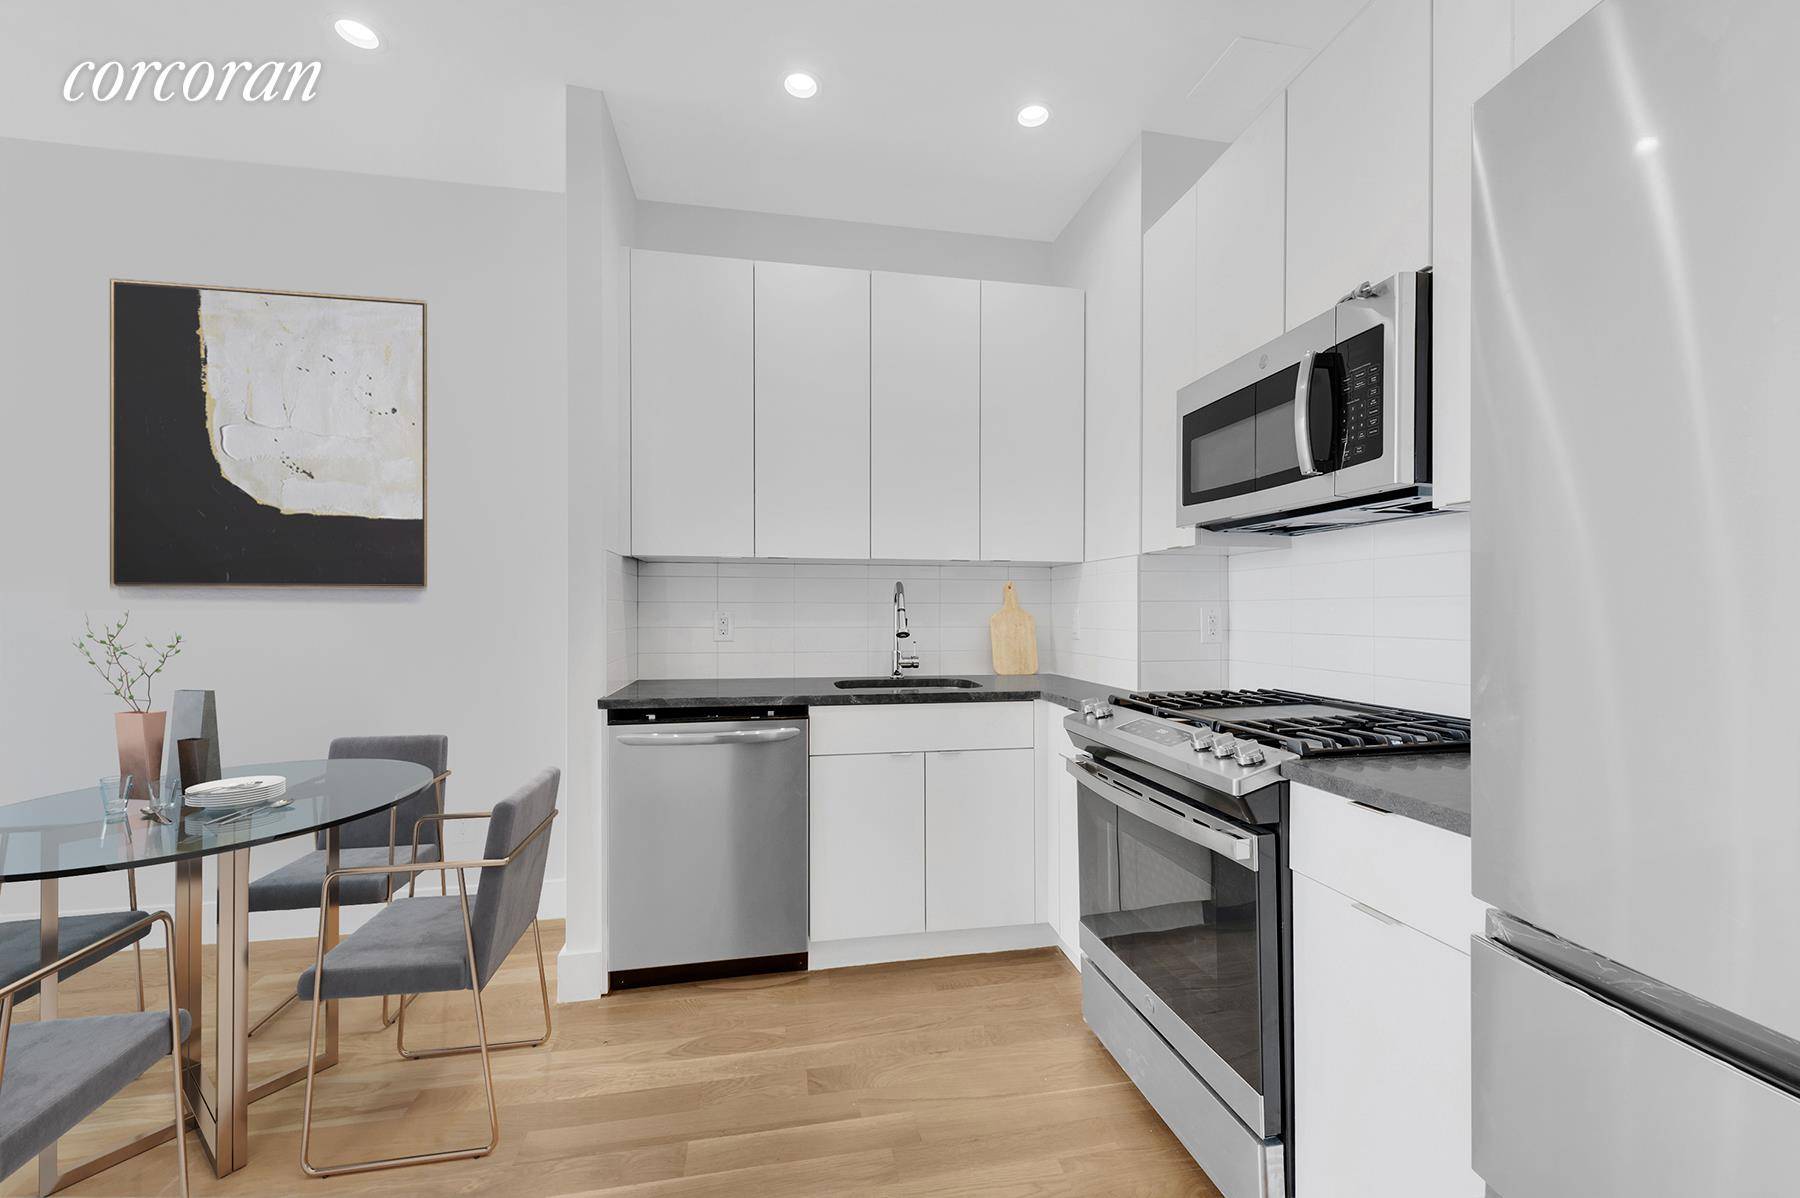 Welcome to 12 Lawton Street, a newly built seven unit condominium in the heart of Bushwick, offering a combination of 1 and 2 bedroom layouts.